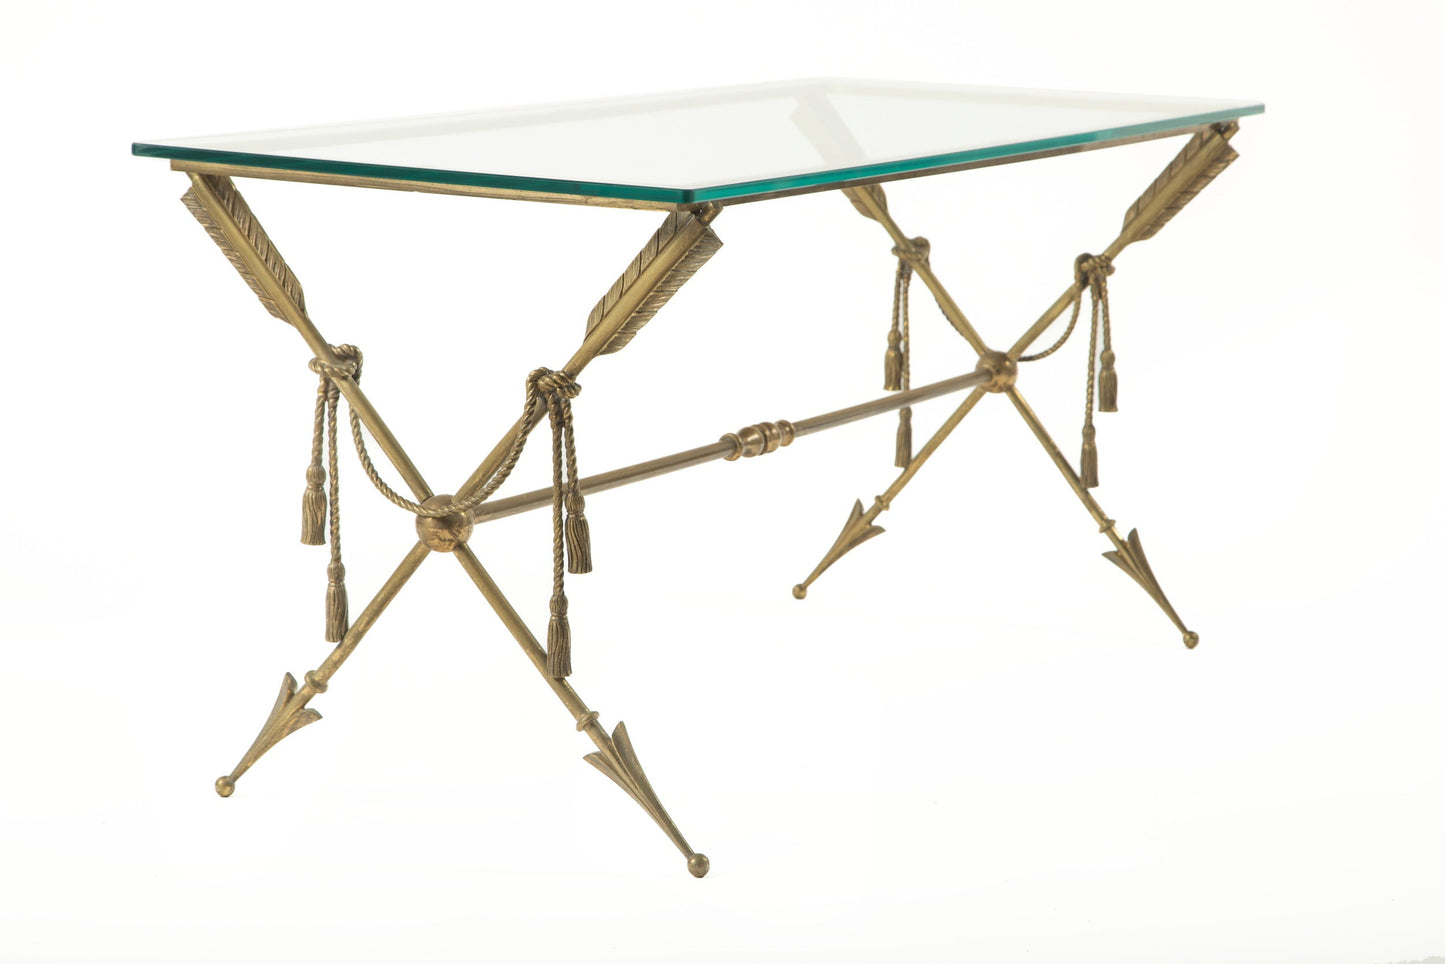 Living room table attributable to Andrea Busiri Vici, 1950s